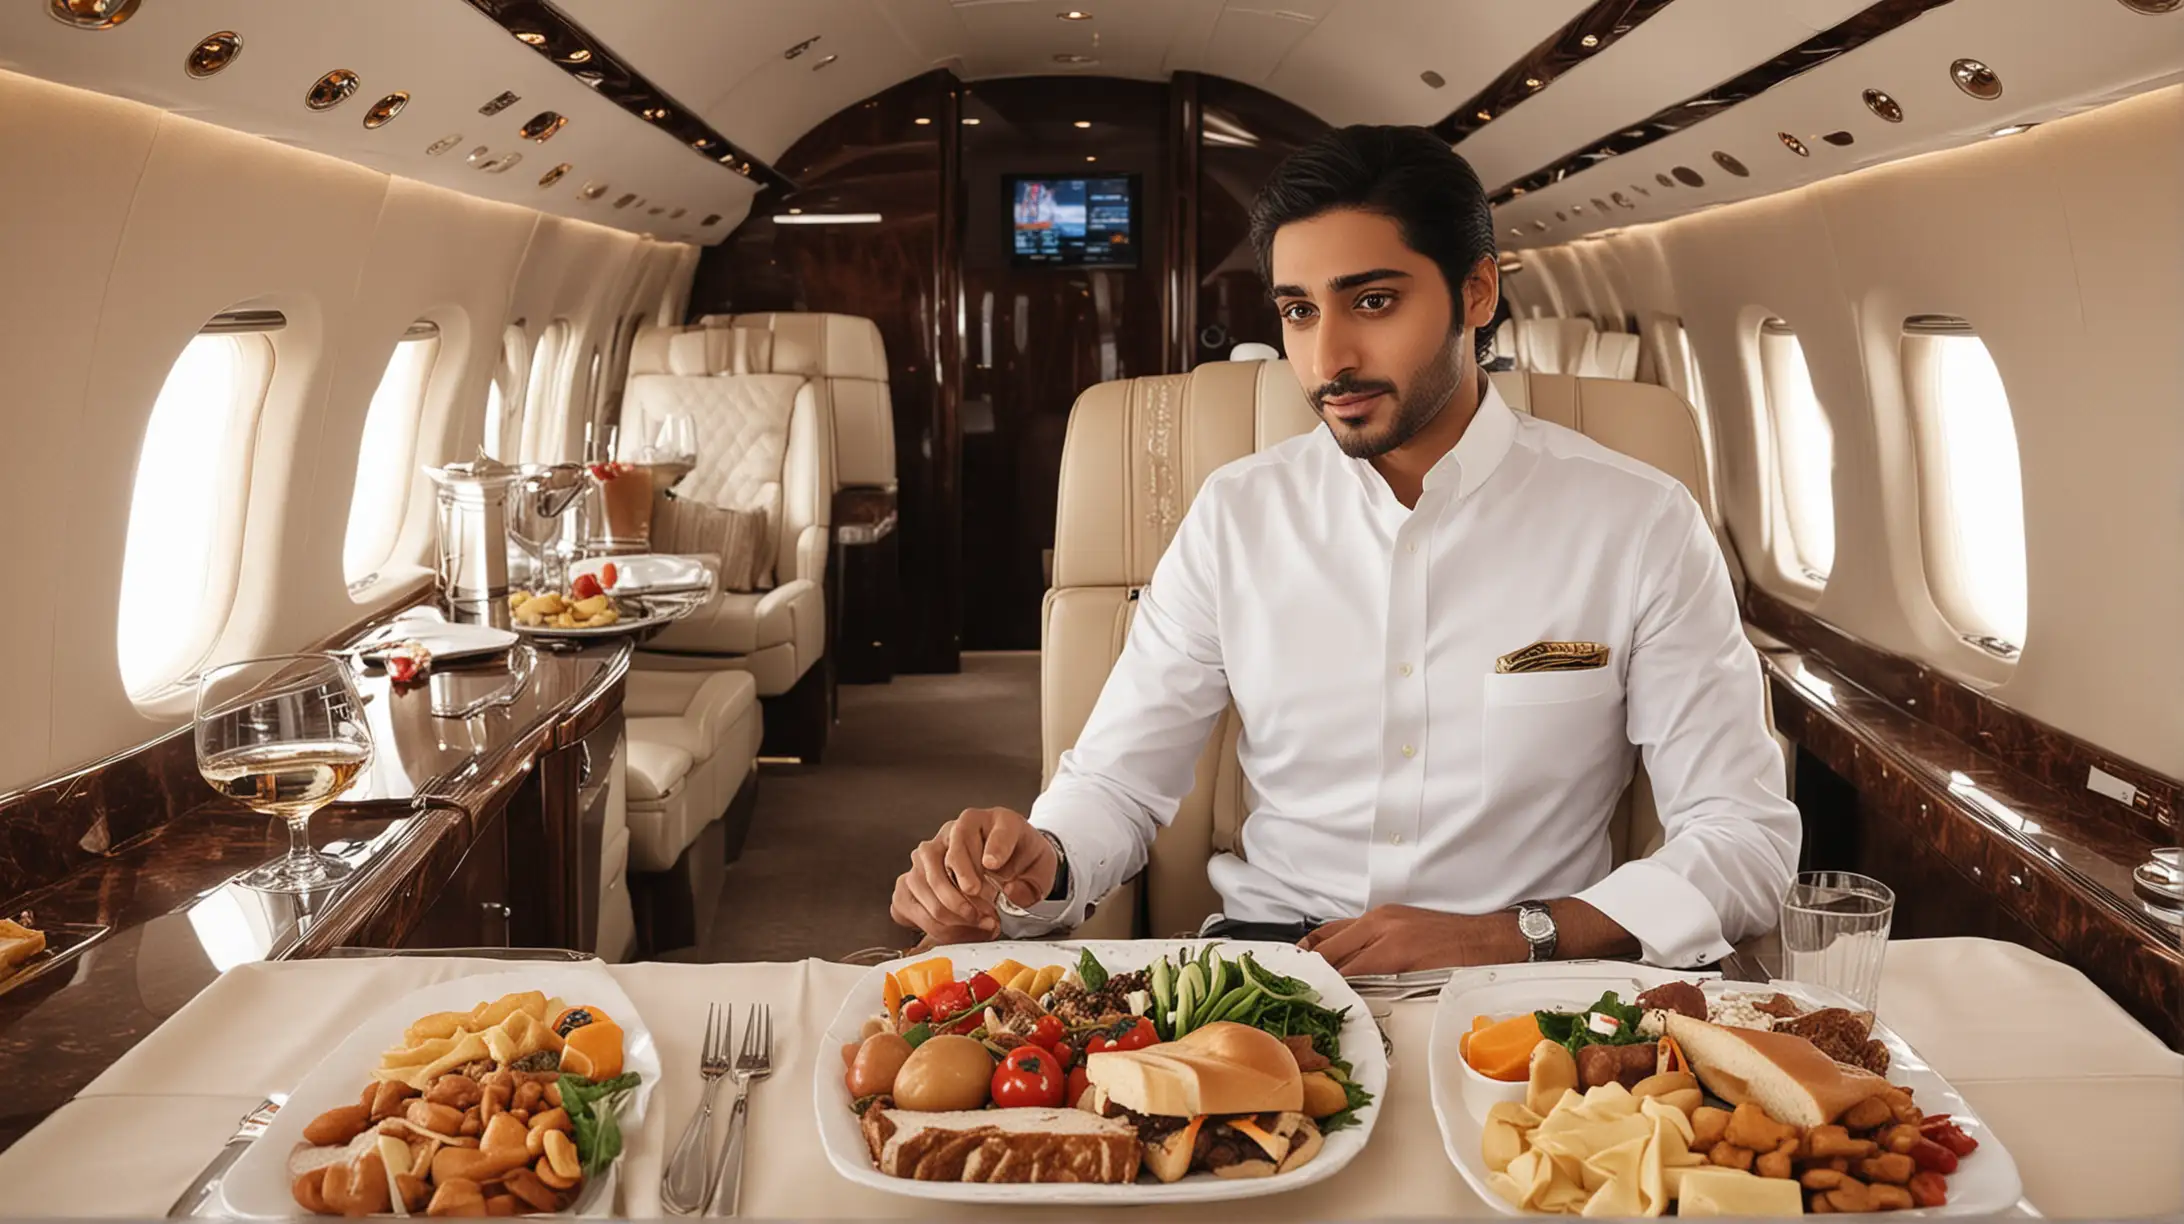 Dubai Prince Eating Food in private Jet